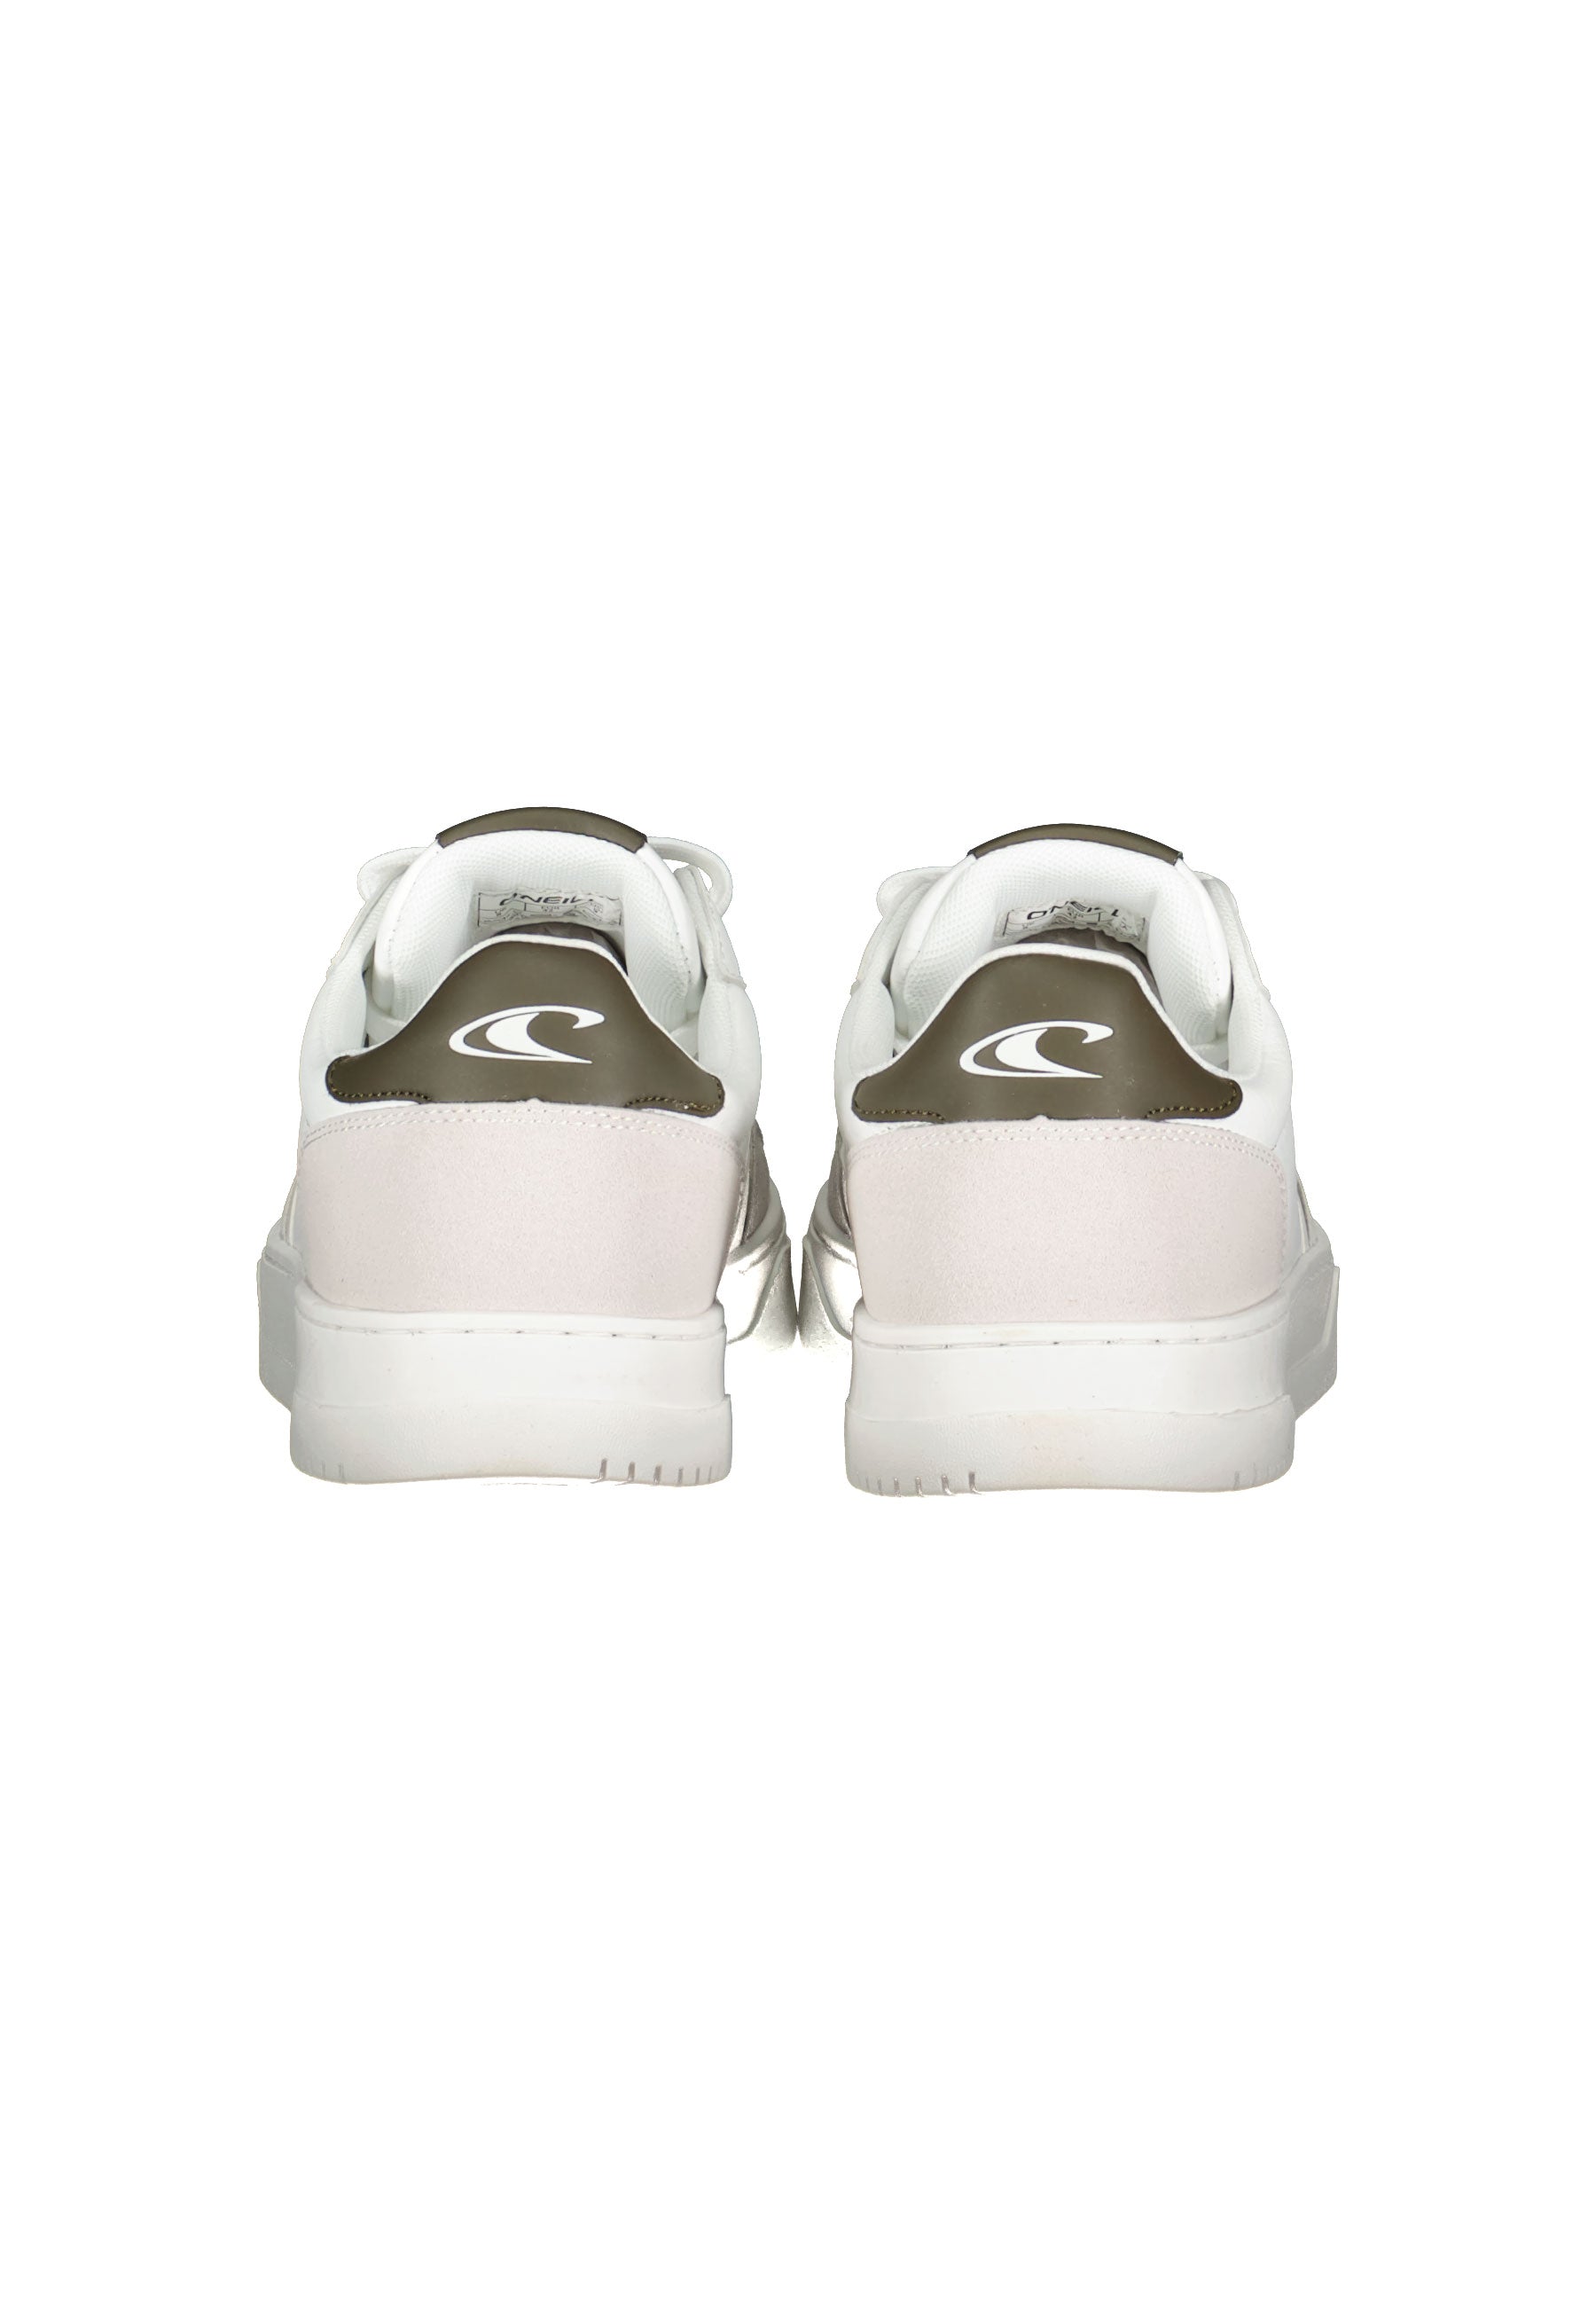 Galveston Low in Bright White/ Olive Sneakers O'Neill   